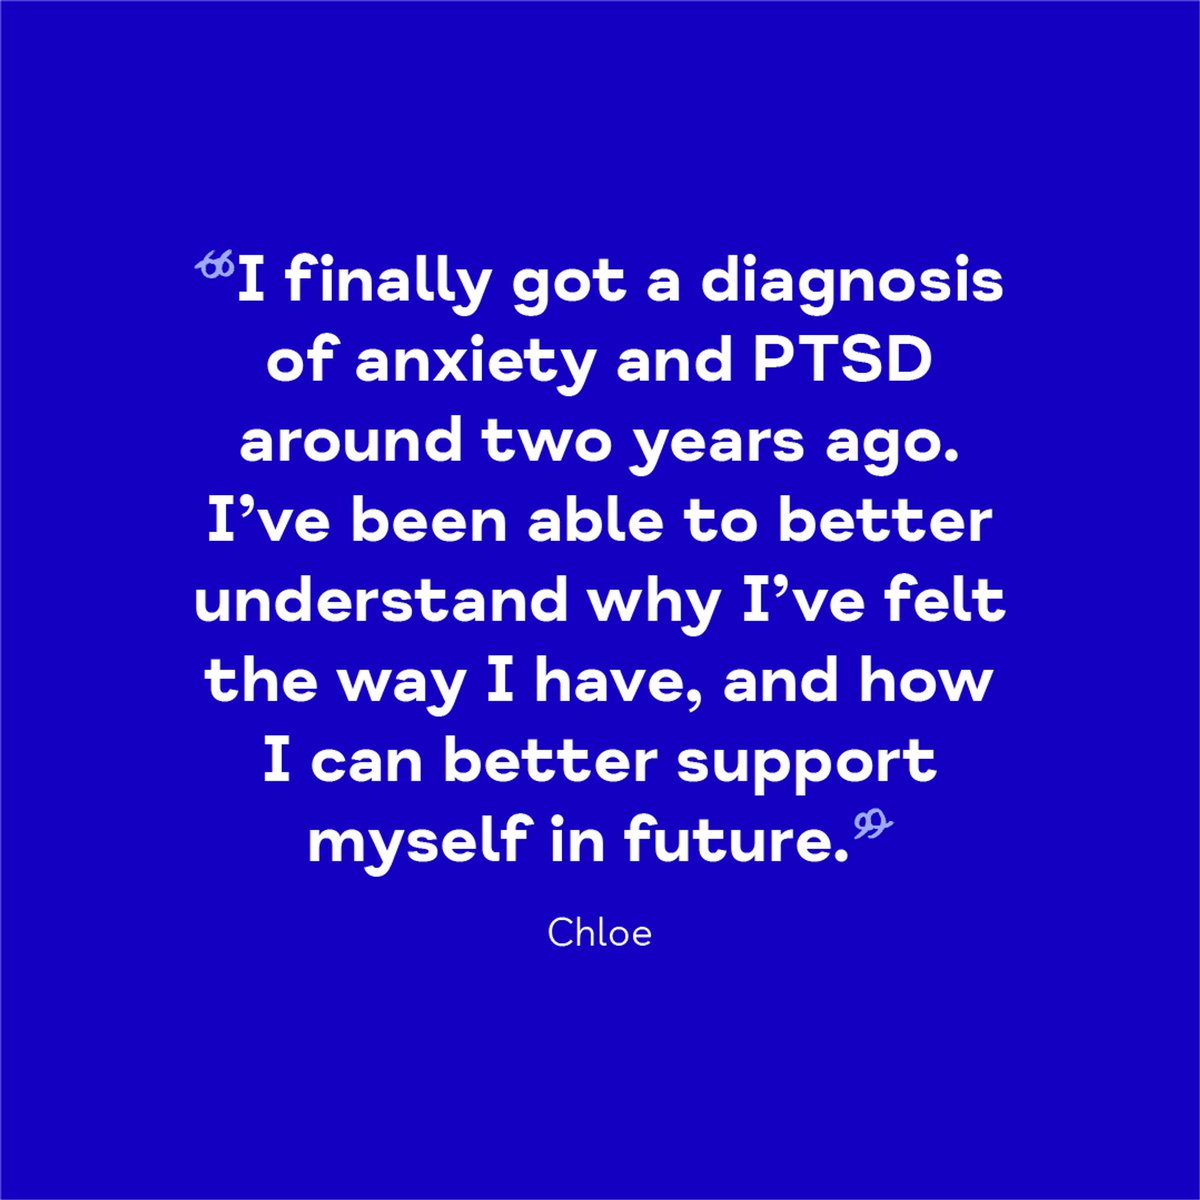 Whilst Welsh Government consults on its new mental health strategy, Chloe shares her experiences to highlight the importance of early support for young people >